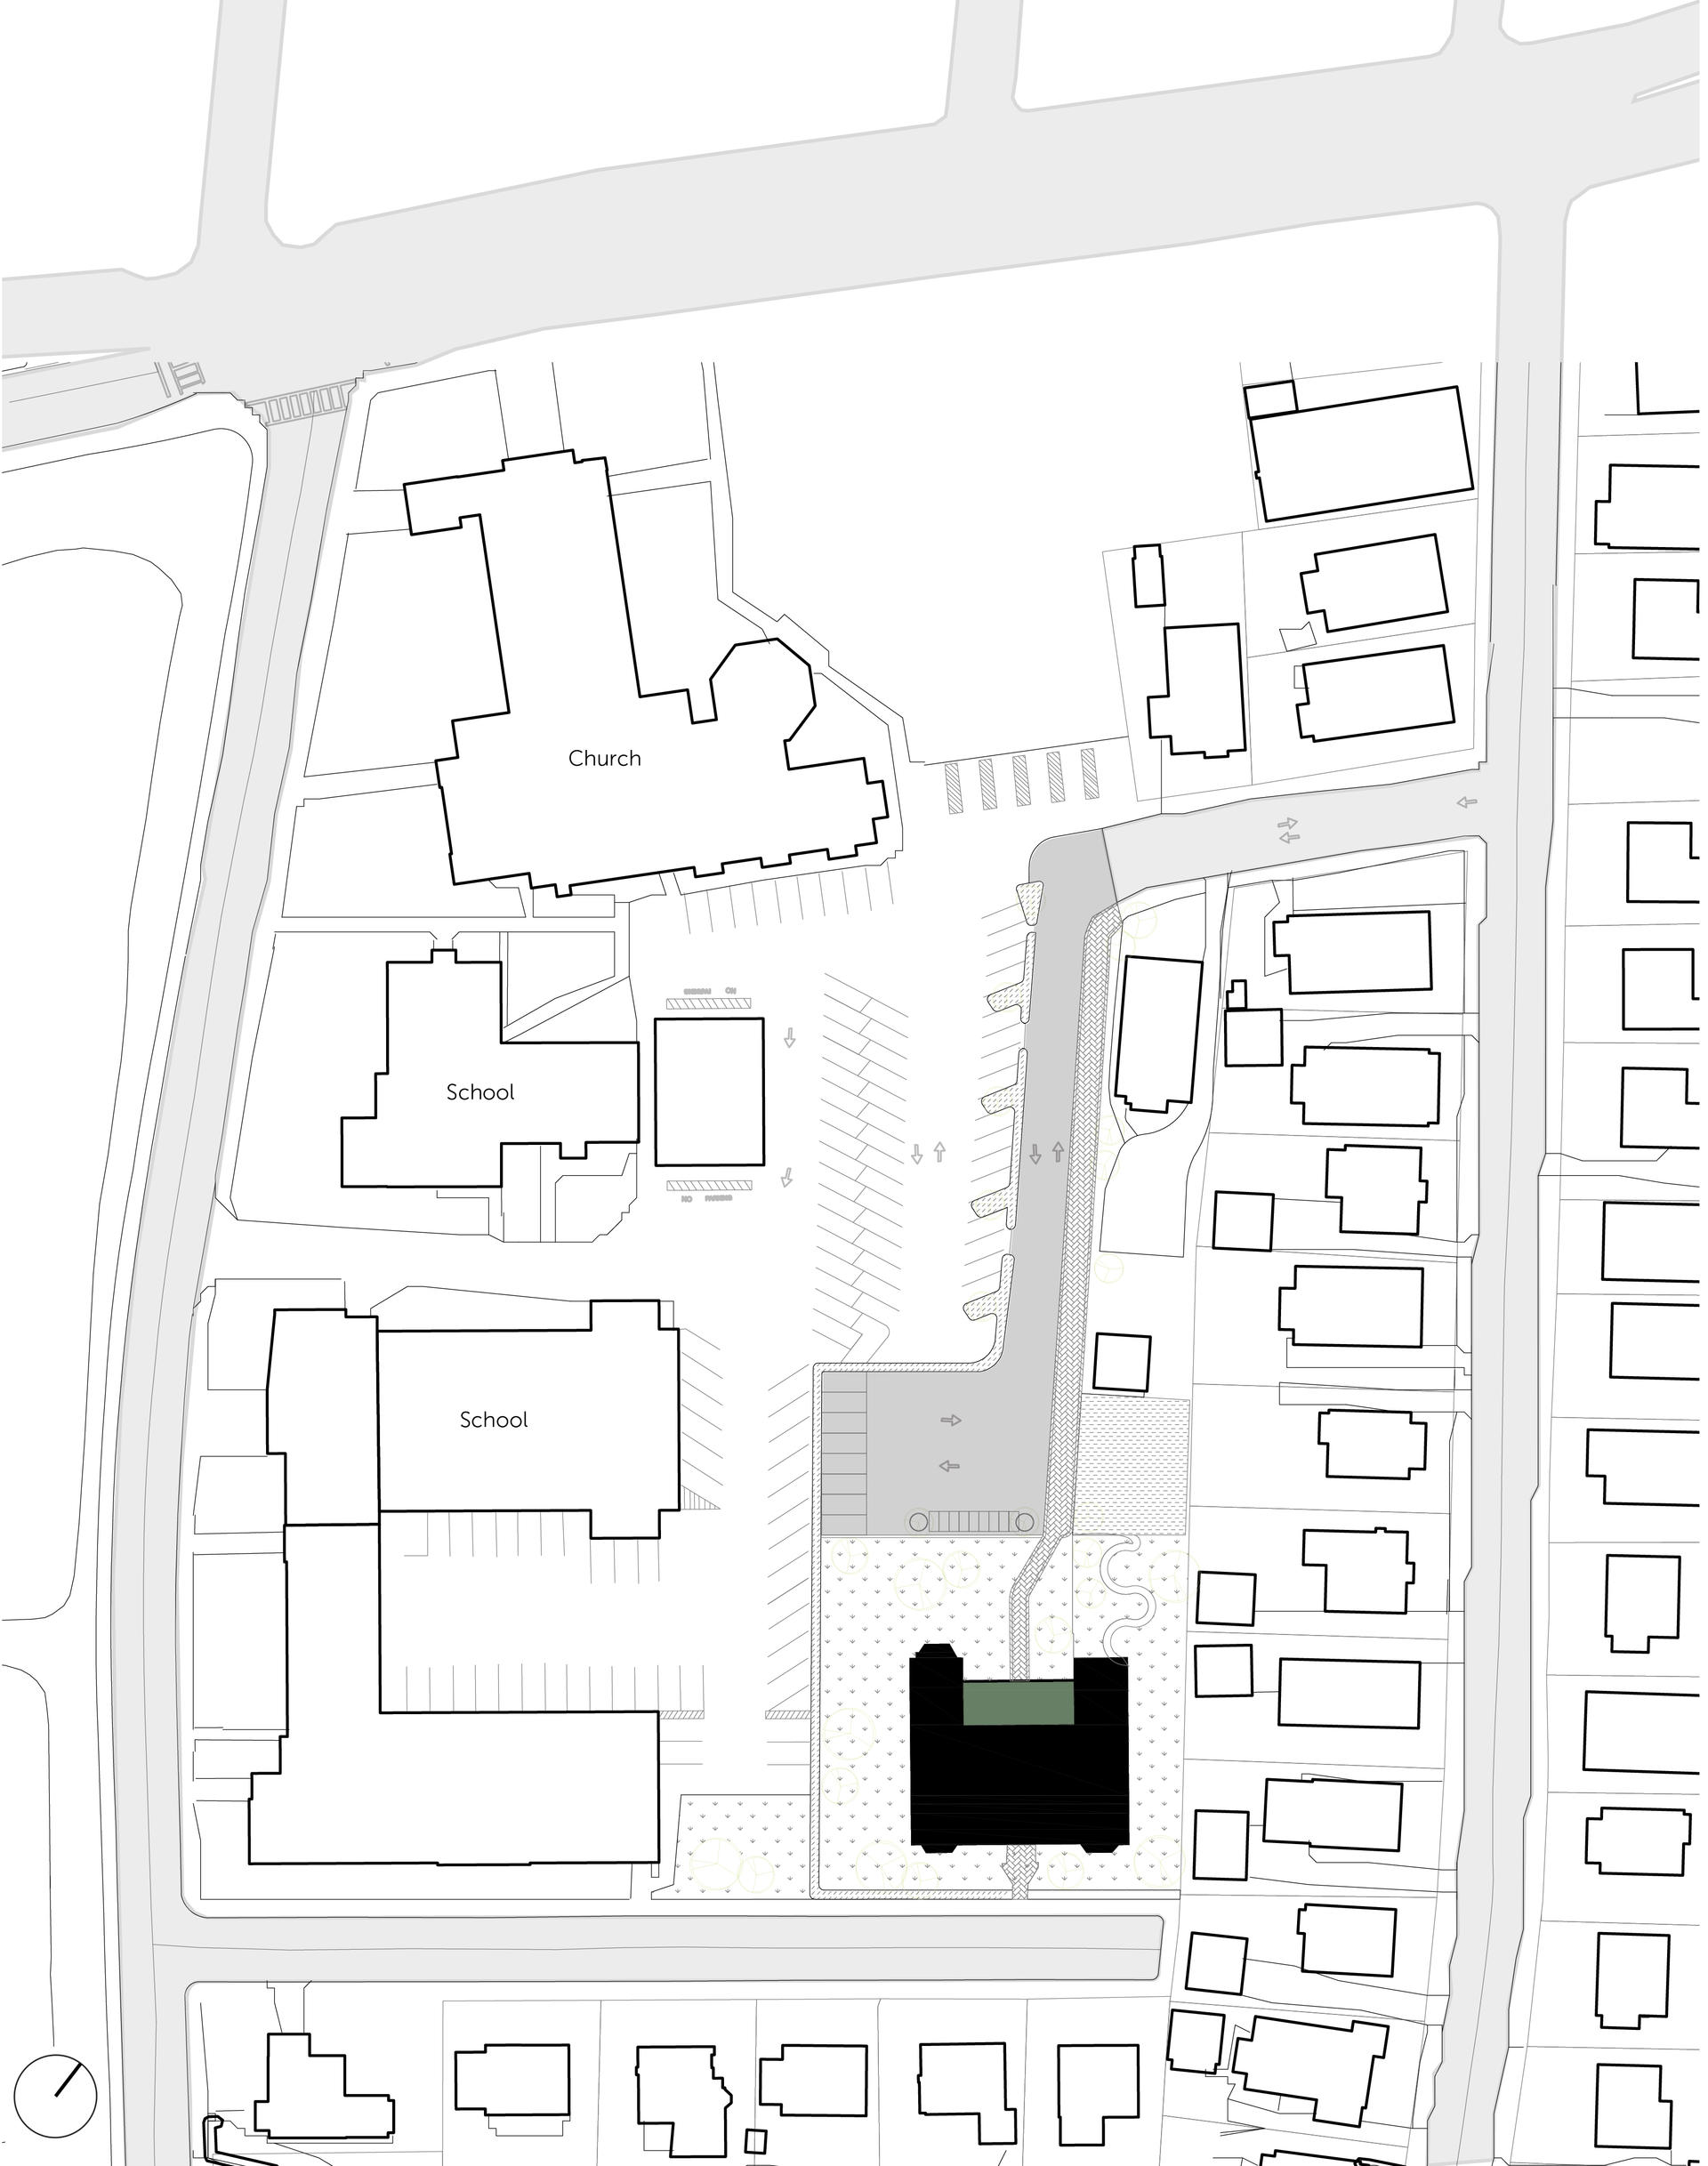 The Host structure is a decommissioned Convent building located within a complex of a Church and a School in a dignified neighborhood of single family residential homes. The vehicular and pedestrian access is redirected to the proposed front of the building. Vegetation is strategically placed as soft boundaries between other buildings in the complex.